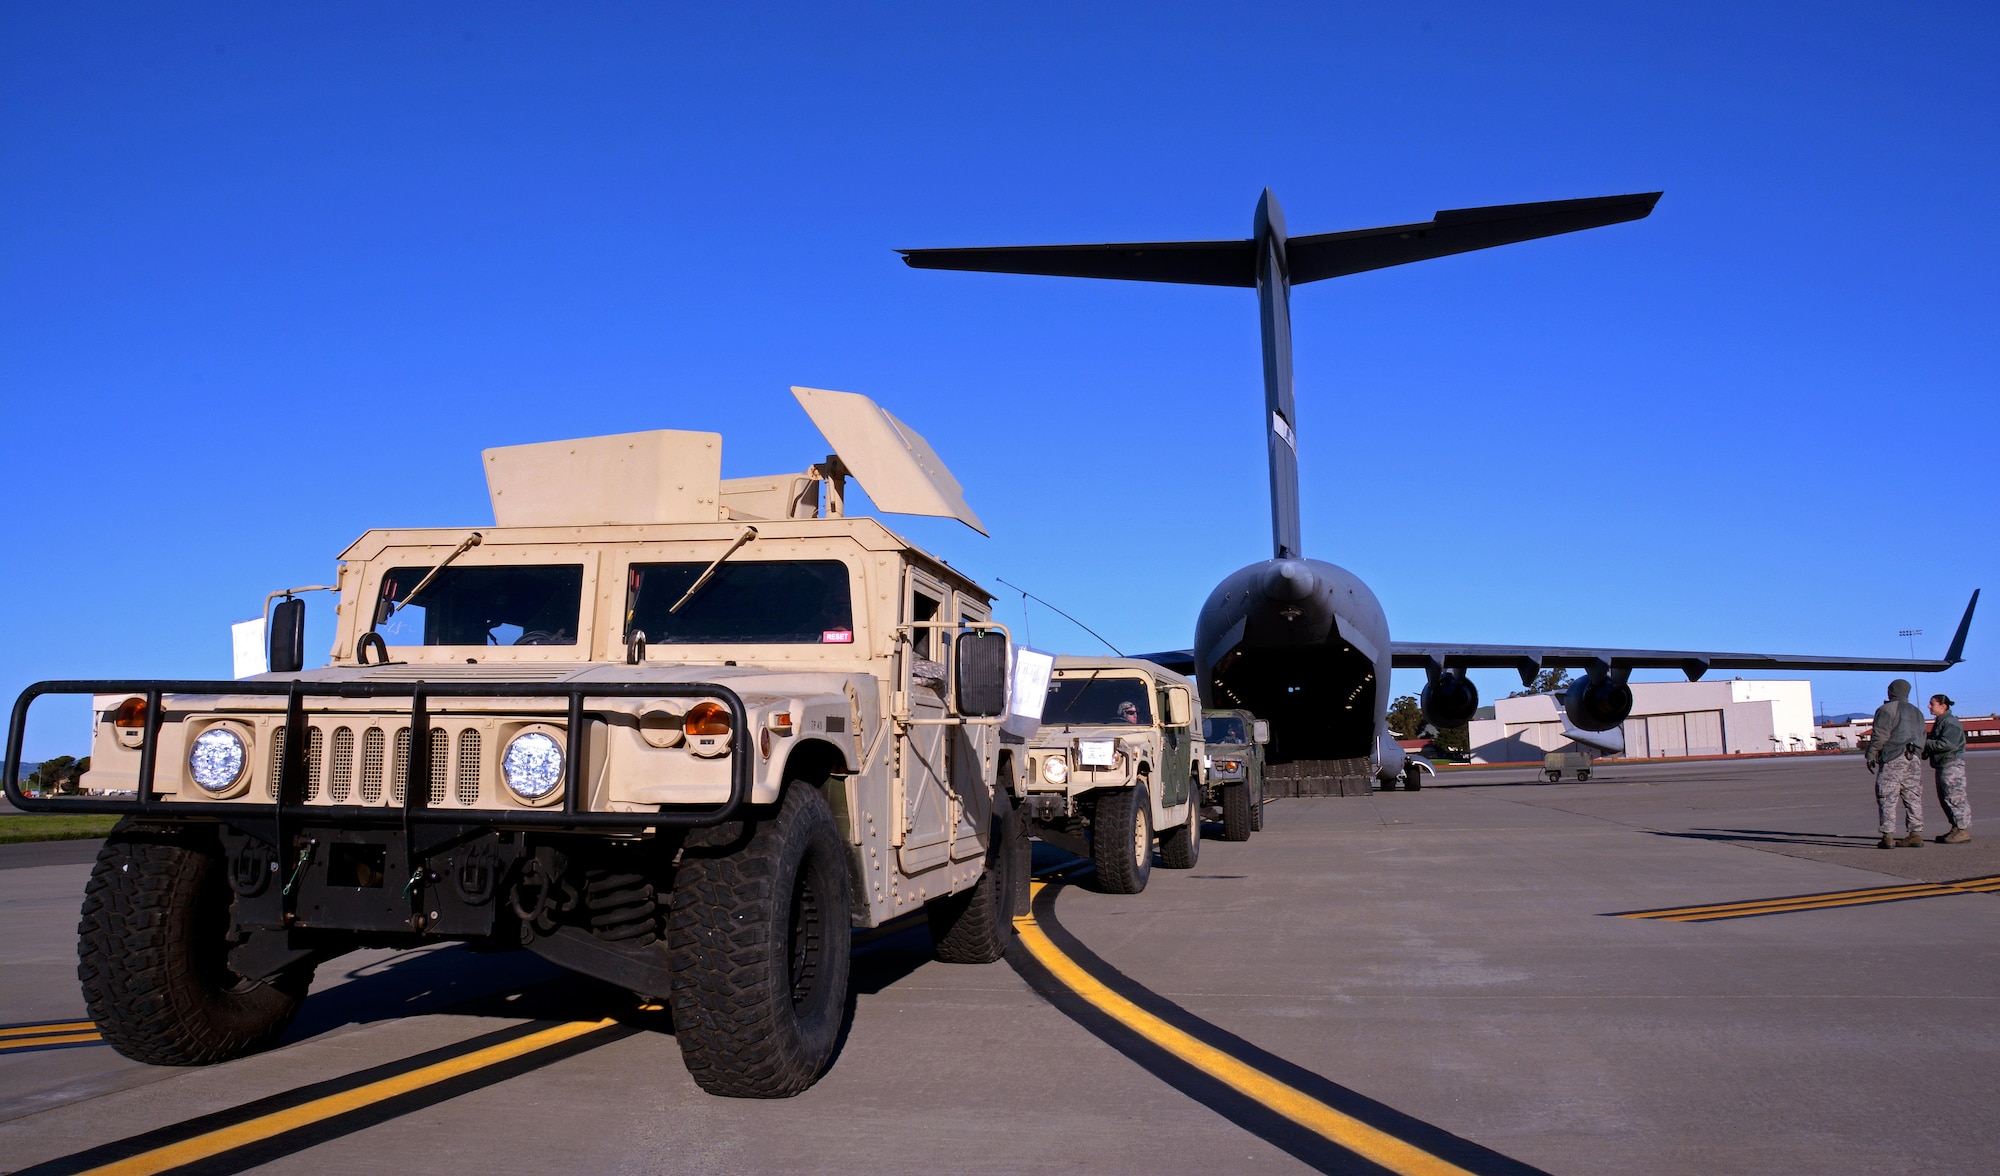 Humvees line up before being backed into a C-17 Globemaster III prior to its take off from Travis Air Force Base, Calif., for Patriot Wyvern on Feb. 11, 2017. Patriot Wyvern is a hands-on, bi-annual event conducted by the 349th Air Mobility Wing designed to hone combat skills and improve organizational interoperability. (U.S. Air Force photo/Staff Sgt. Daniel Phelps)